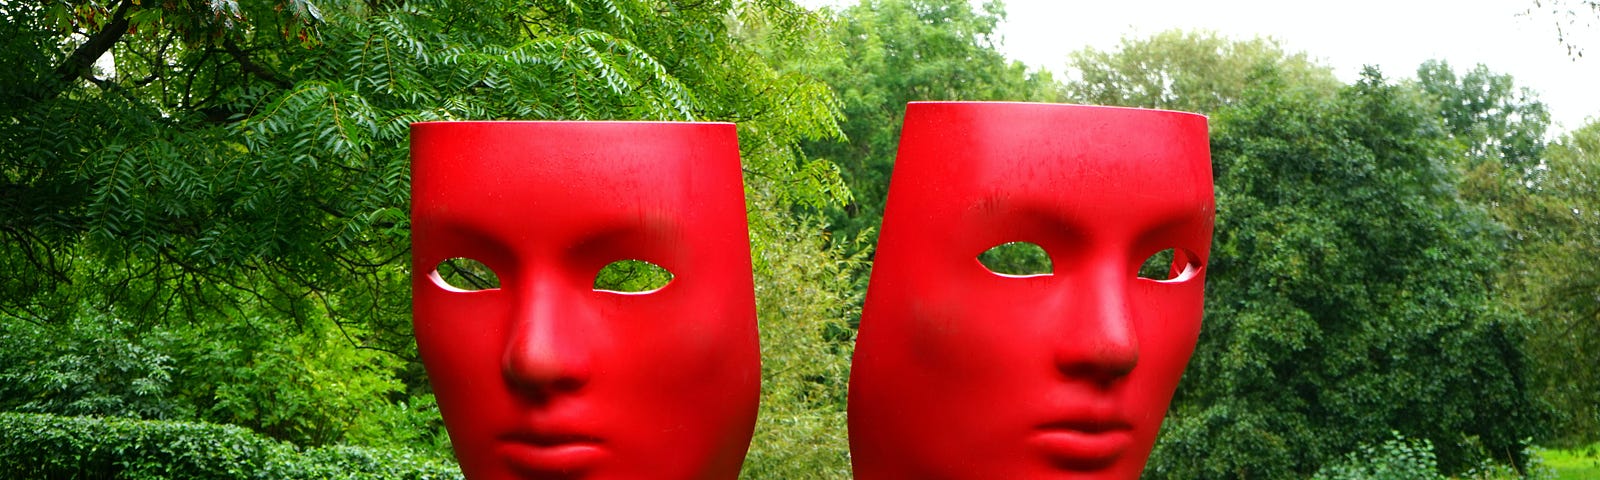 Two large red dramatic masks in a green, grassy space